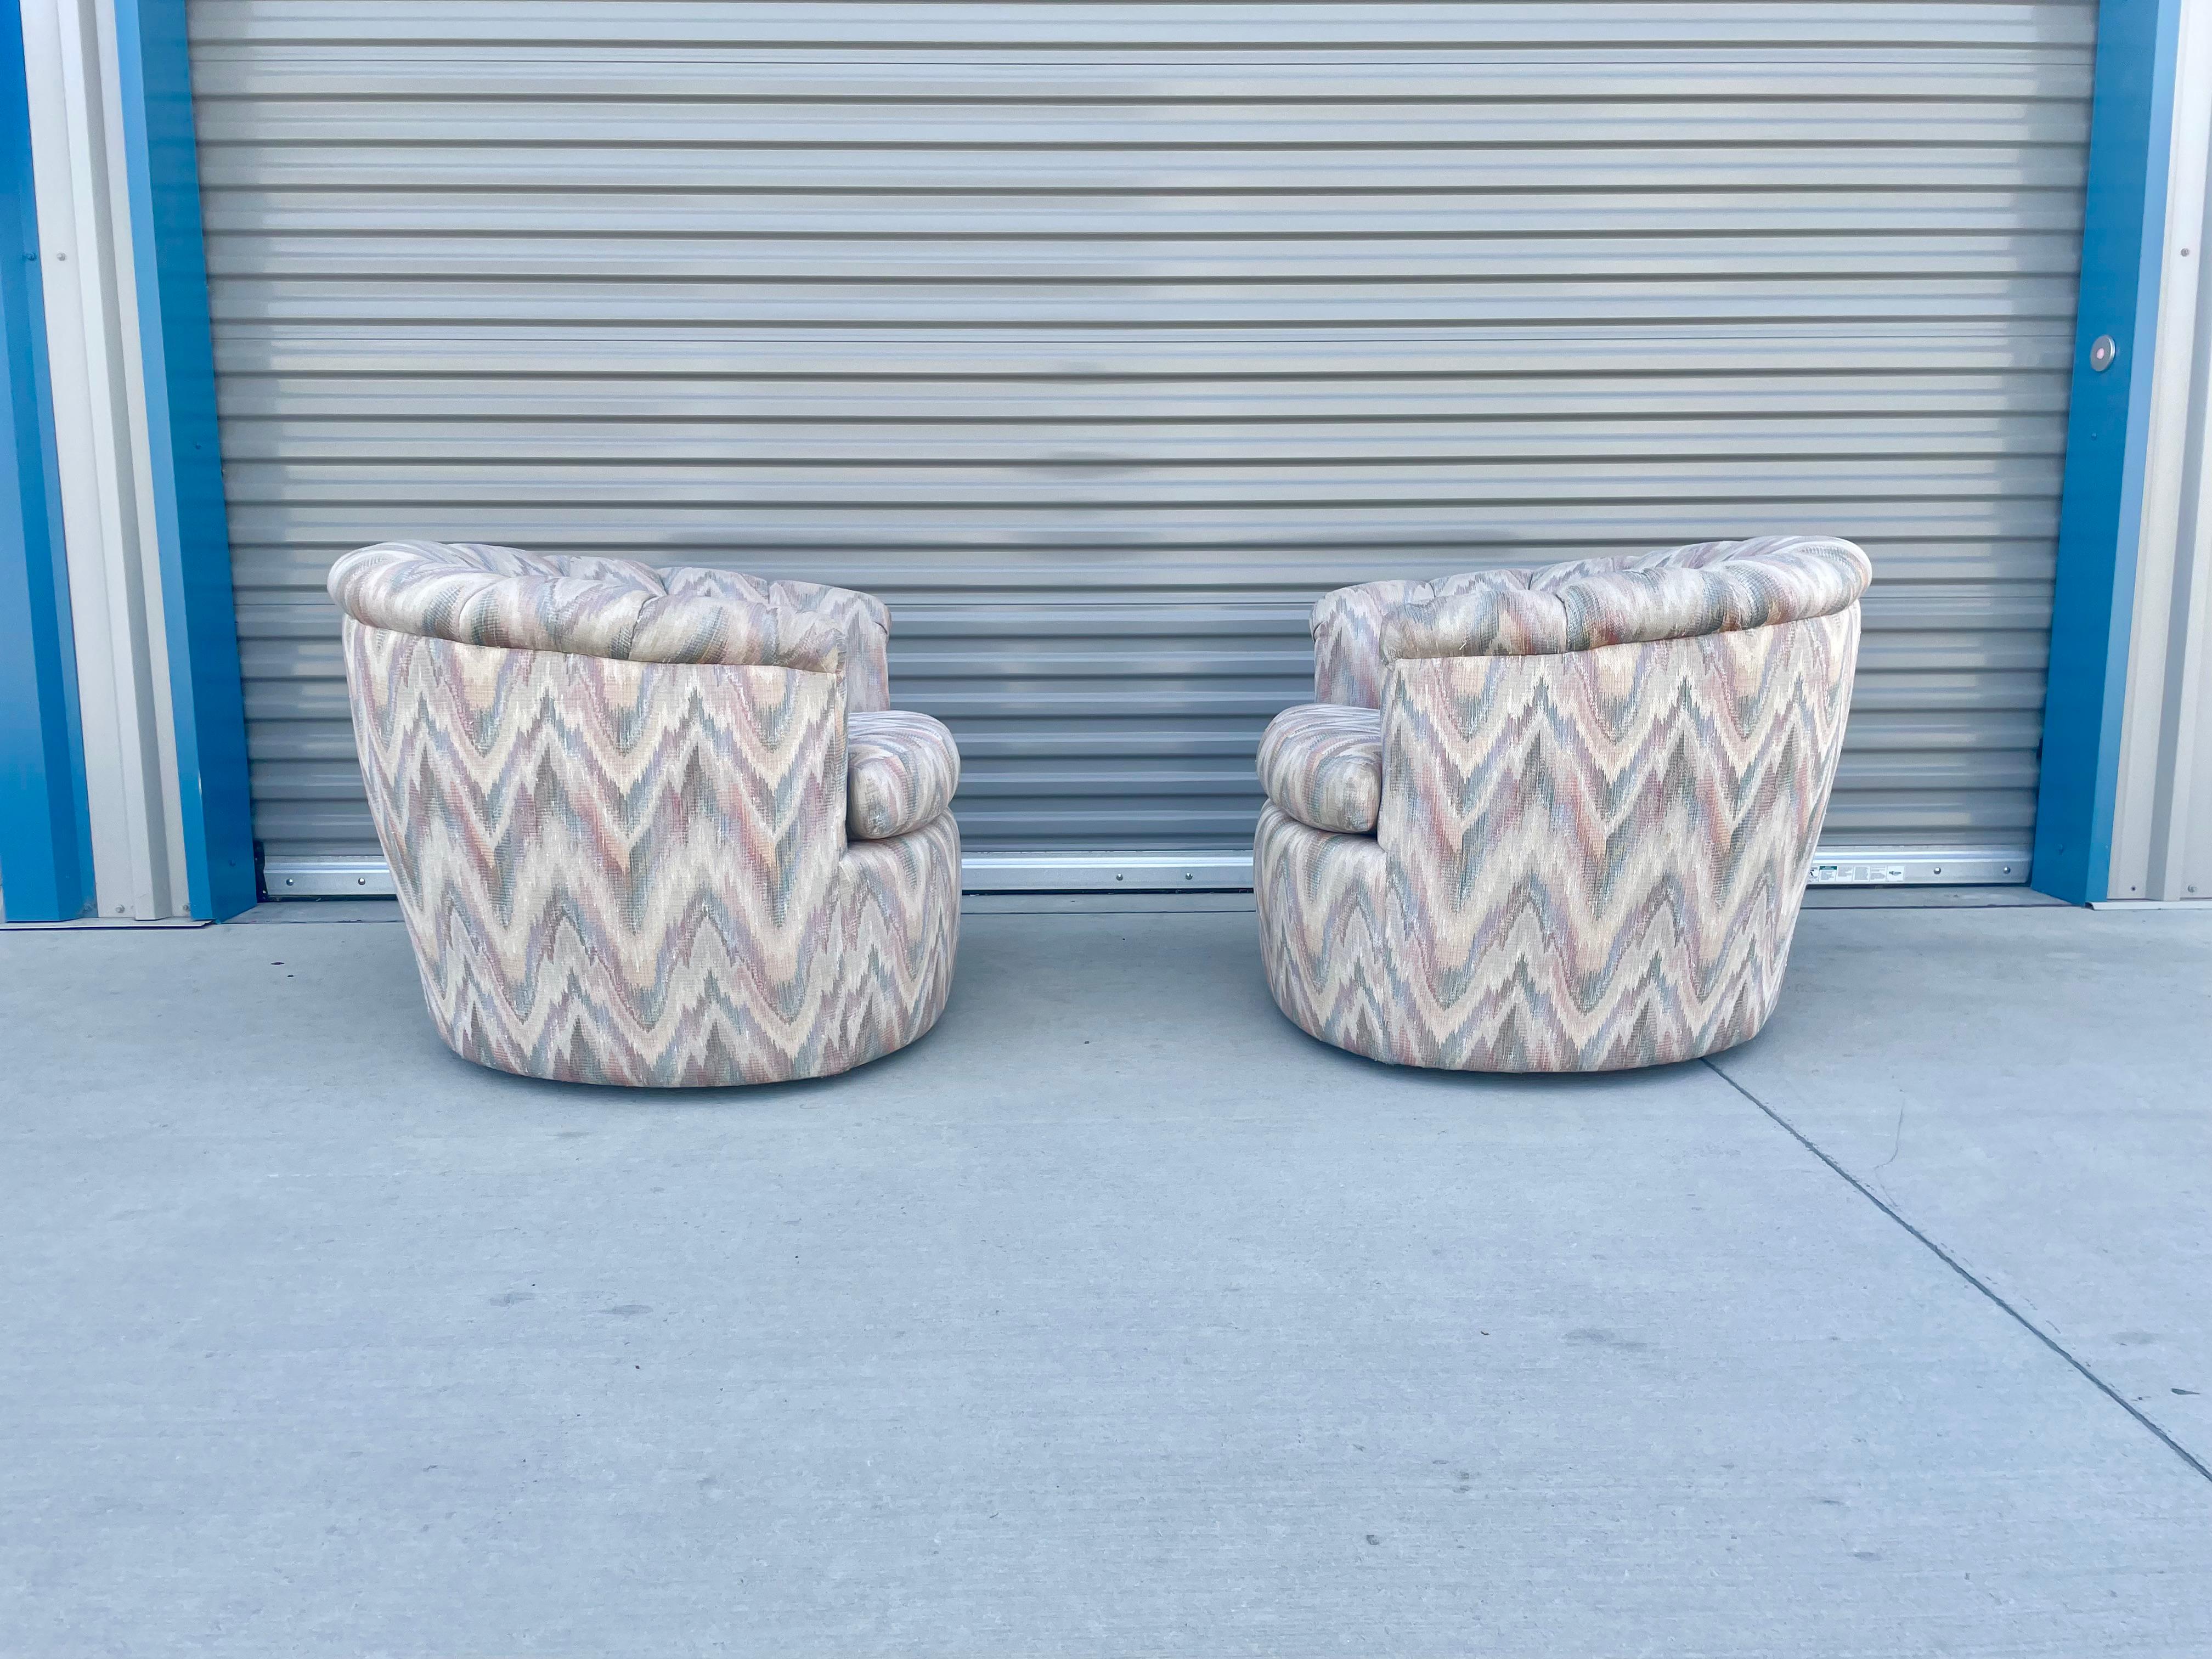 Midcentury Swivel Lounge Chairs Styled After Milo Baughman In Fair Condition For Sale In North Hollywood, CA